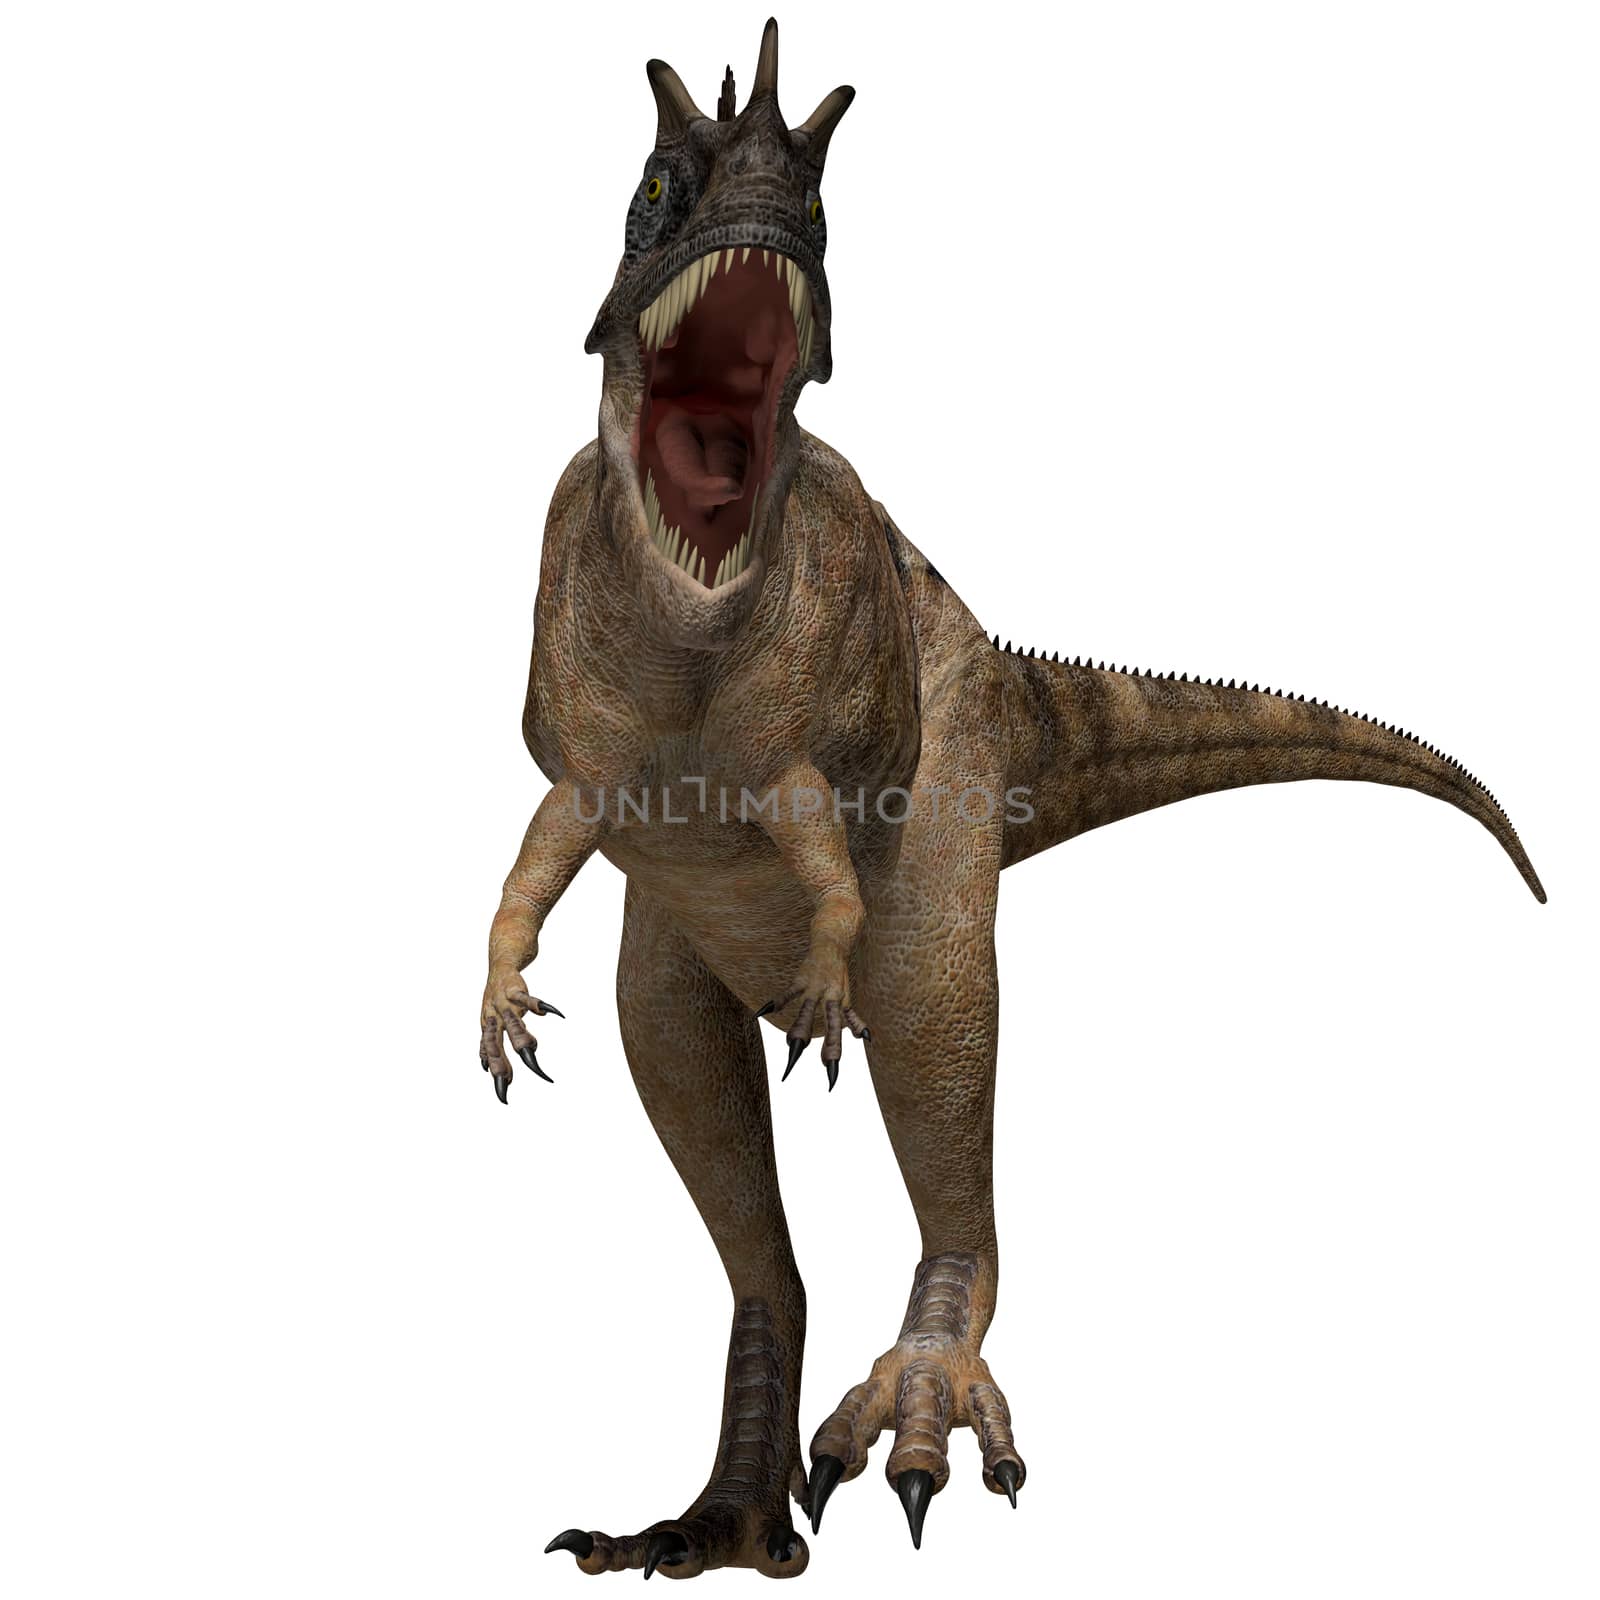 The Ceratosaurus is a horned theropod dinosaur found in North America from the Jurassic Period.